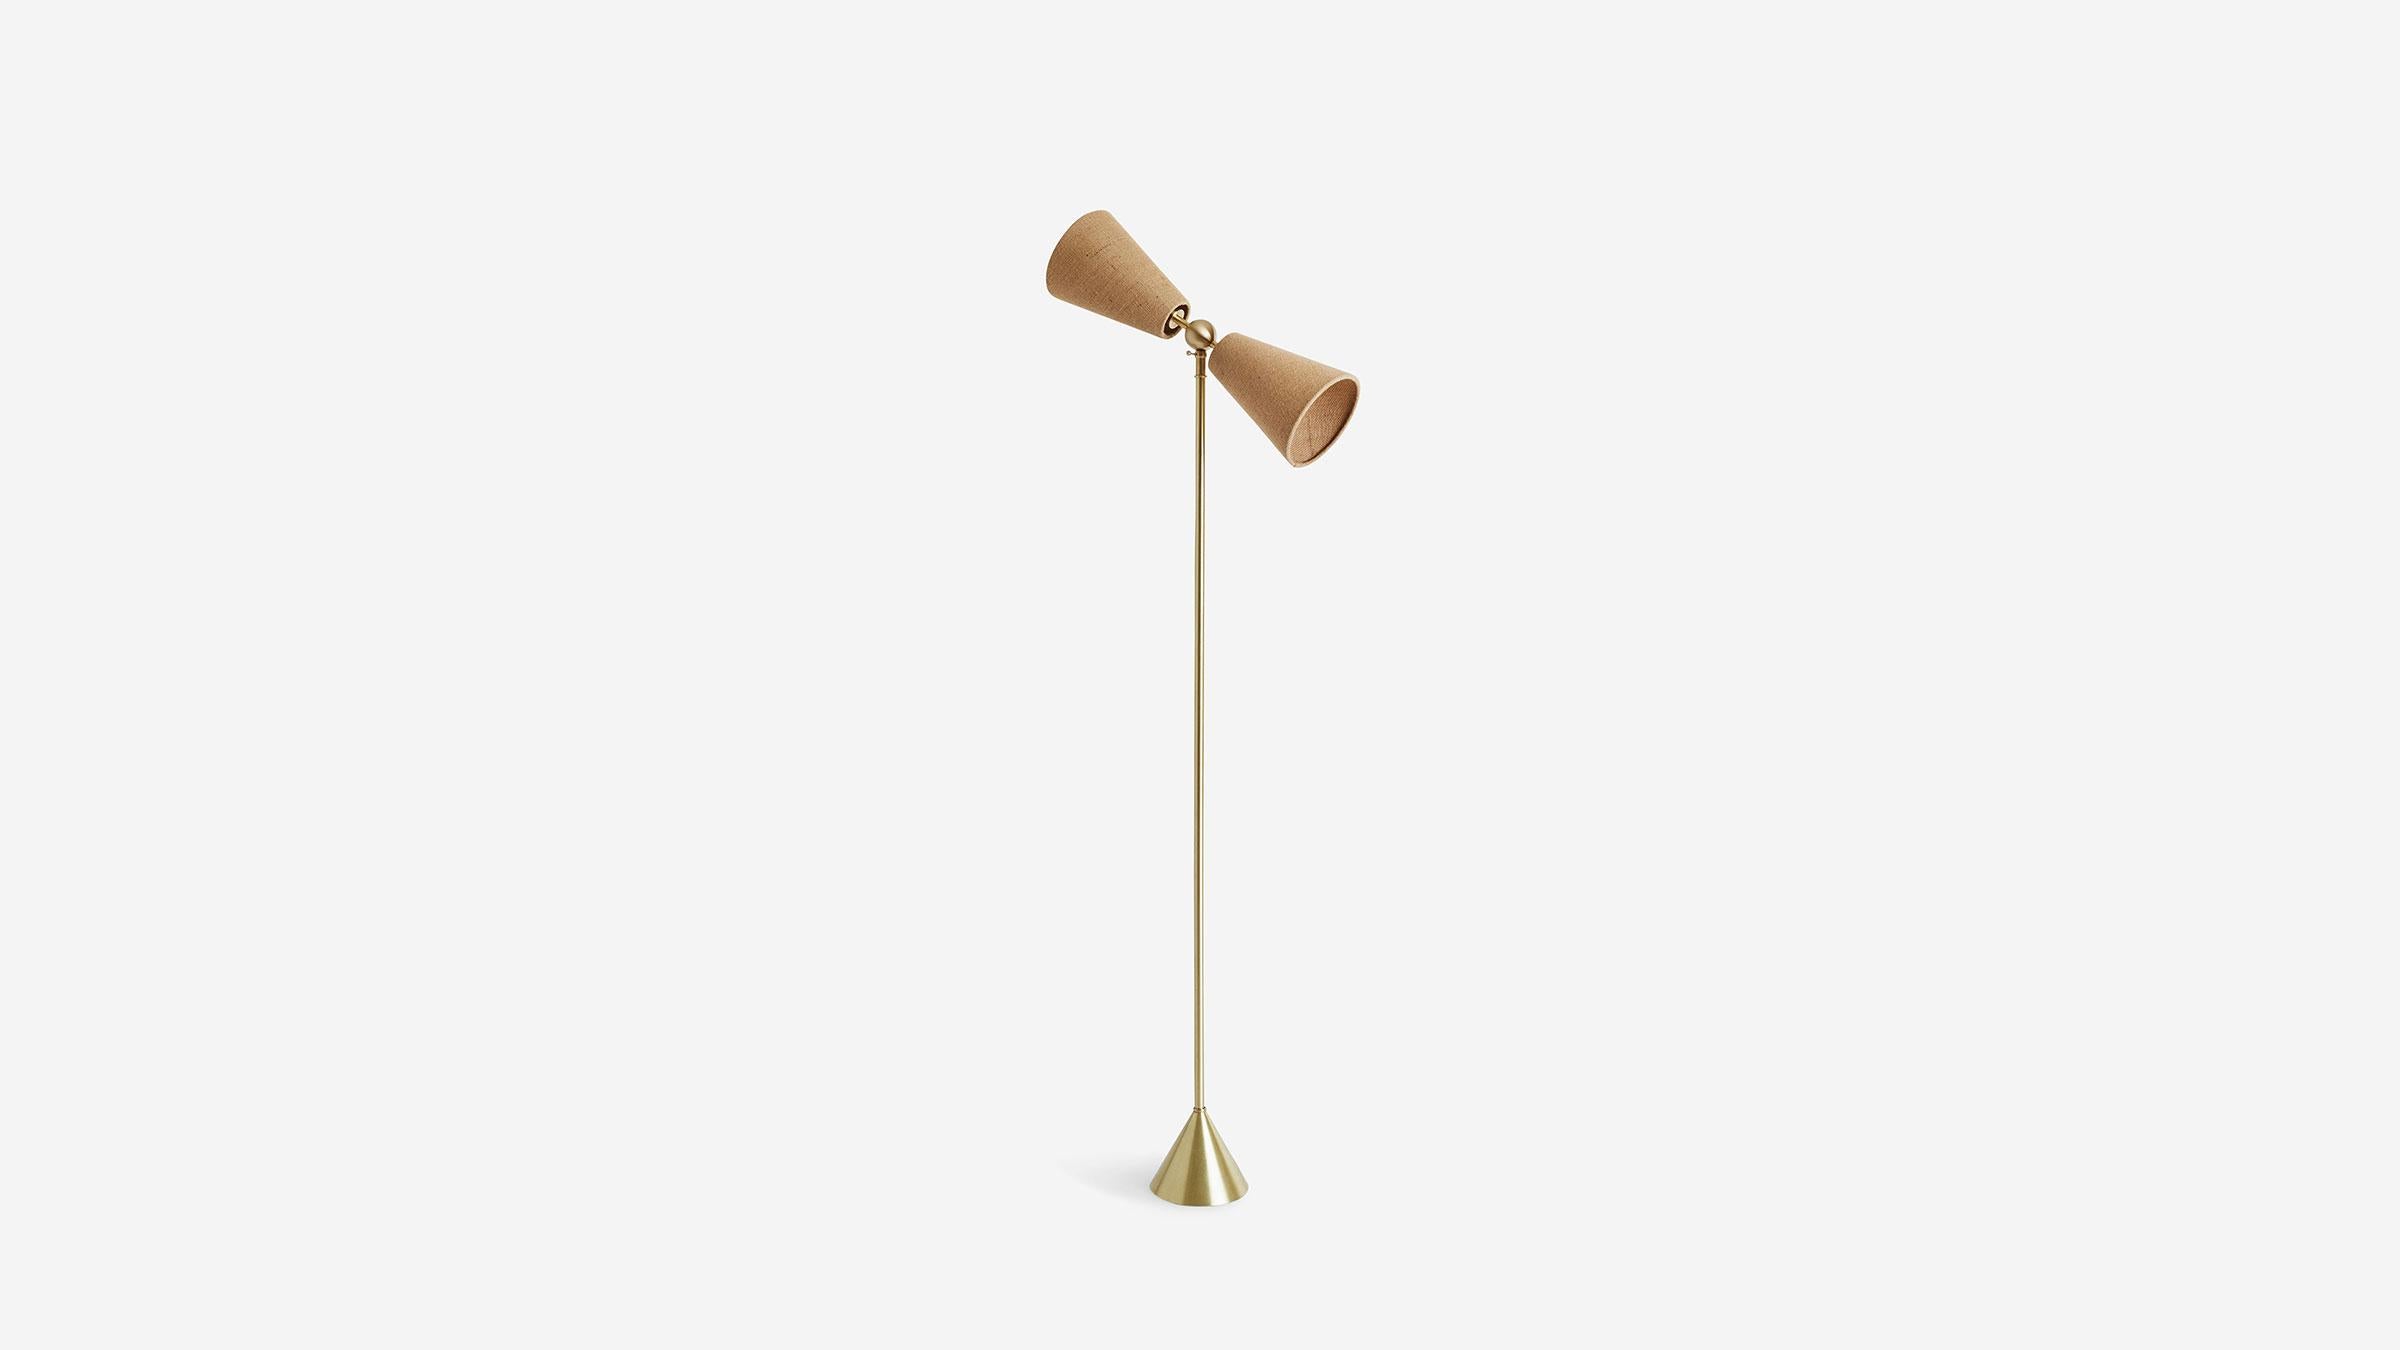 PENDOLO FLOOR LAMP pivots on extended fulcrum to simultaneously cast light in opposite directions. This sturdy floor piece is well poised to mix seamlessly in material while providing a decisive focal point in form. UL, cUL, CE Listed. Damp Rated.
